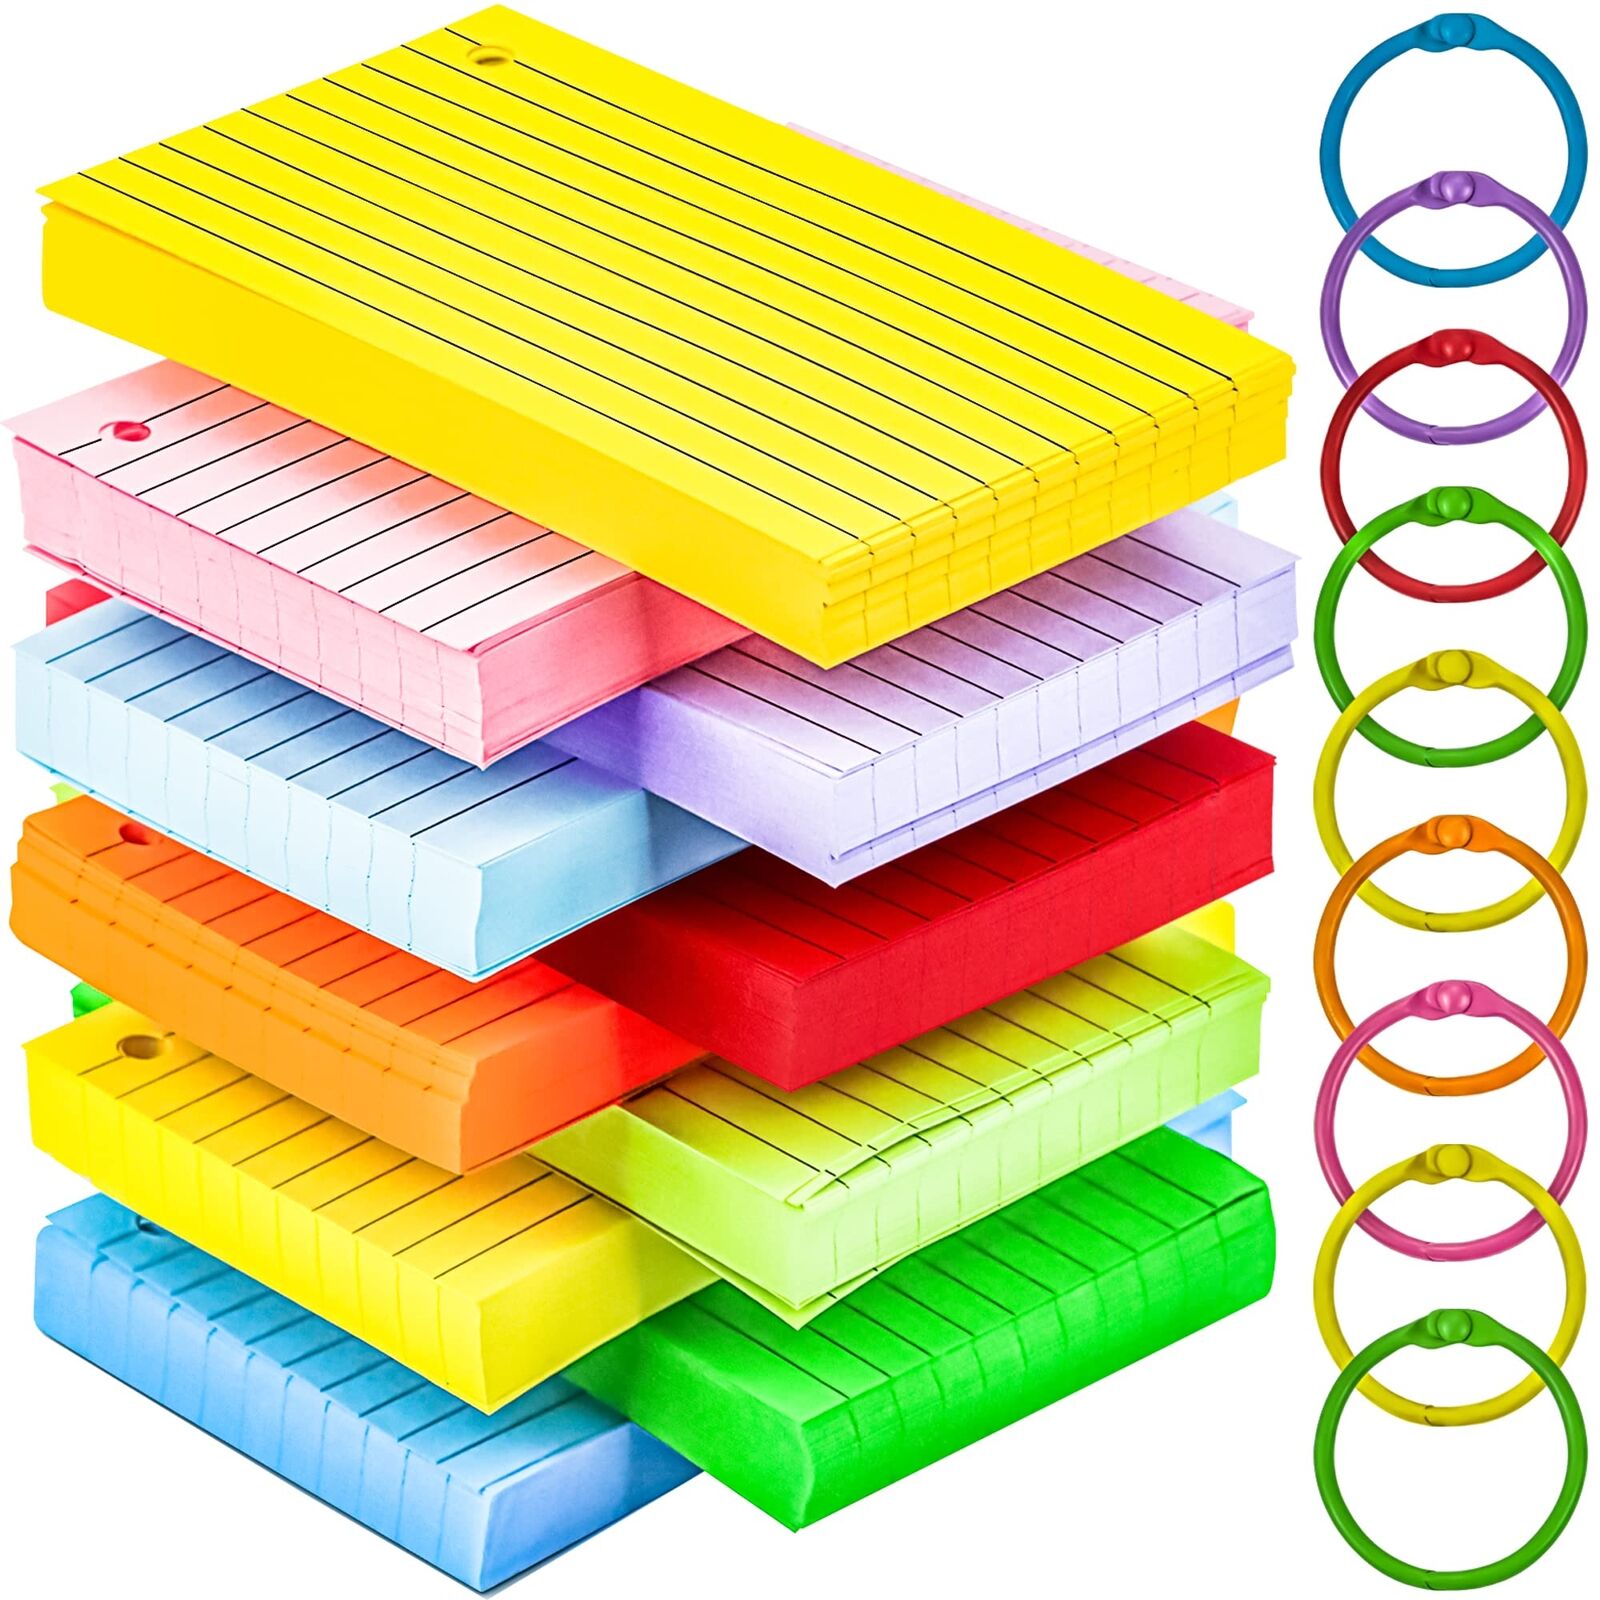 600 Pcs Ruled Index Cards 3x5 Inch Colored Flash Cards with Ring for School